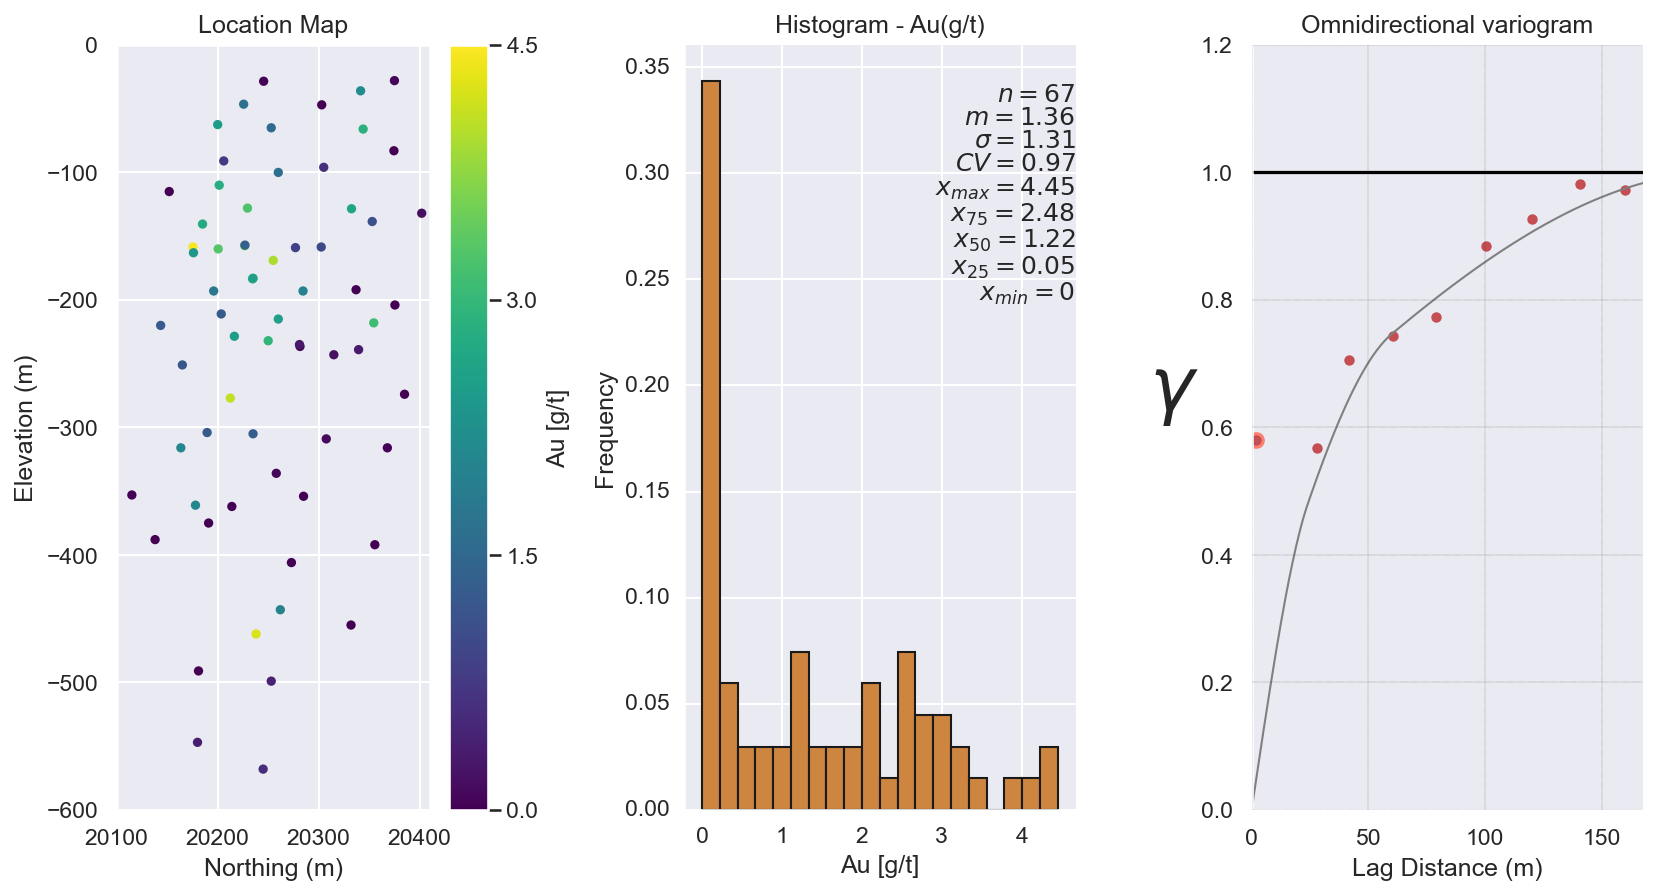 Figure 1: From left to right: Location map, Histogram and Variogram model of the variable Au(g/t).